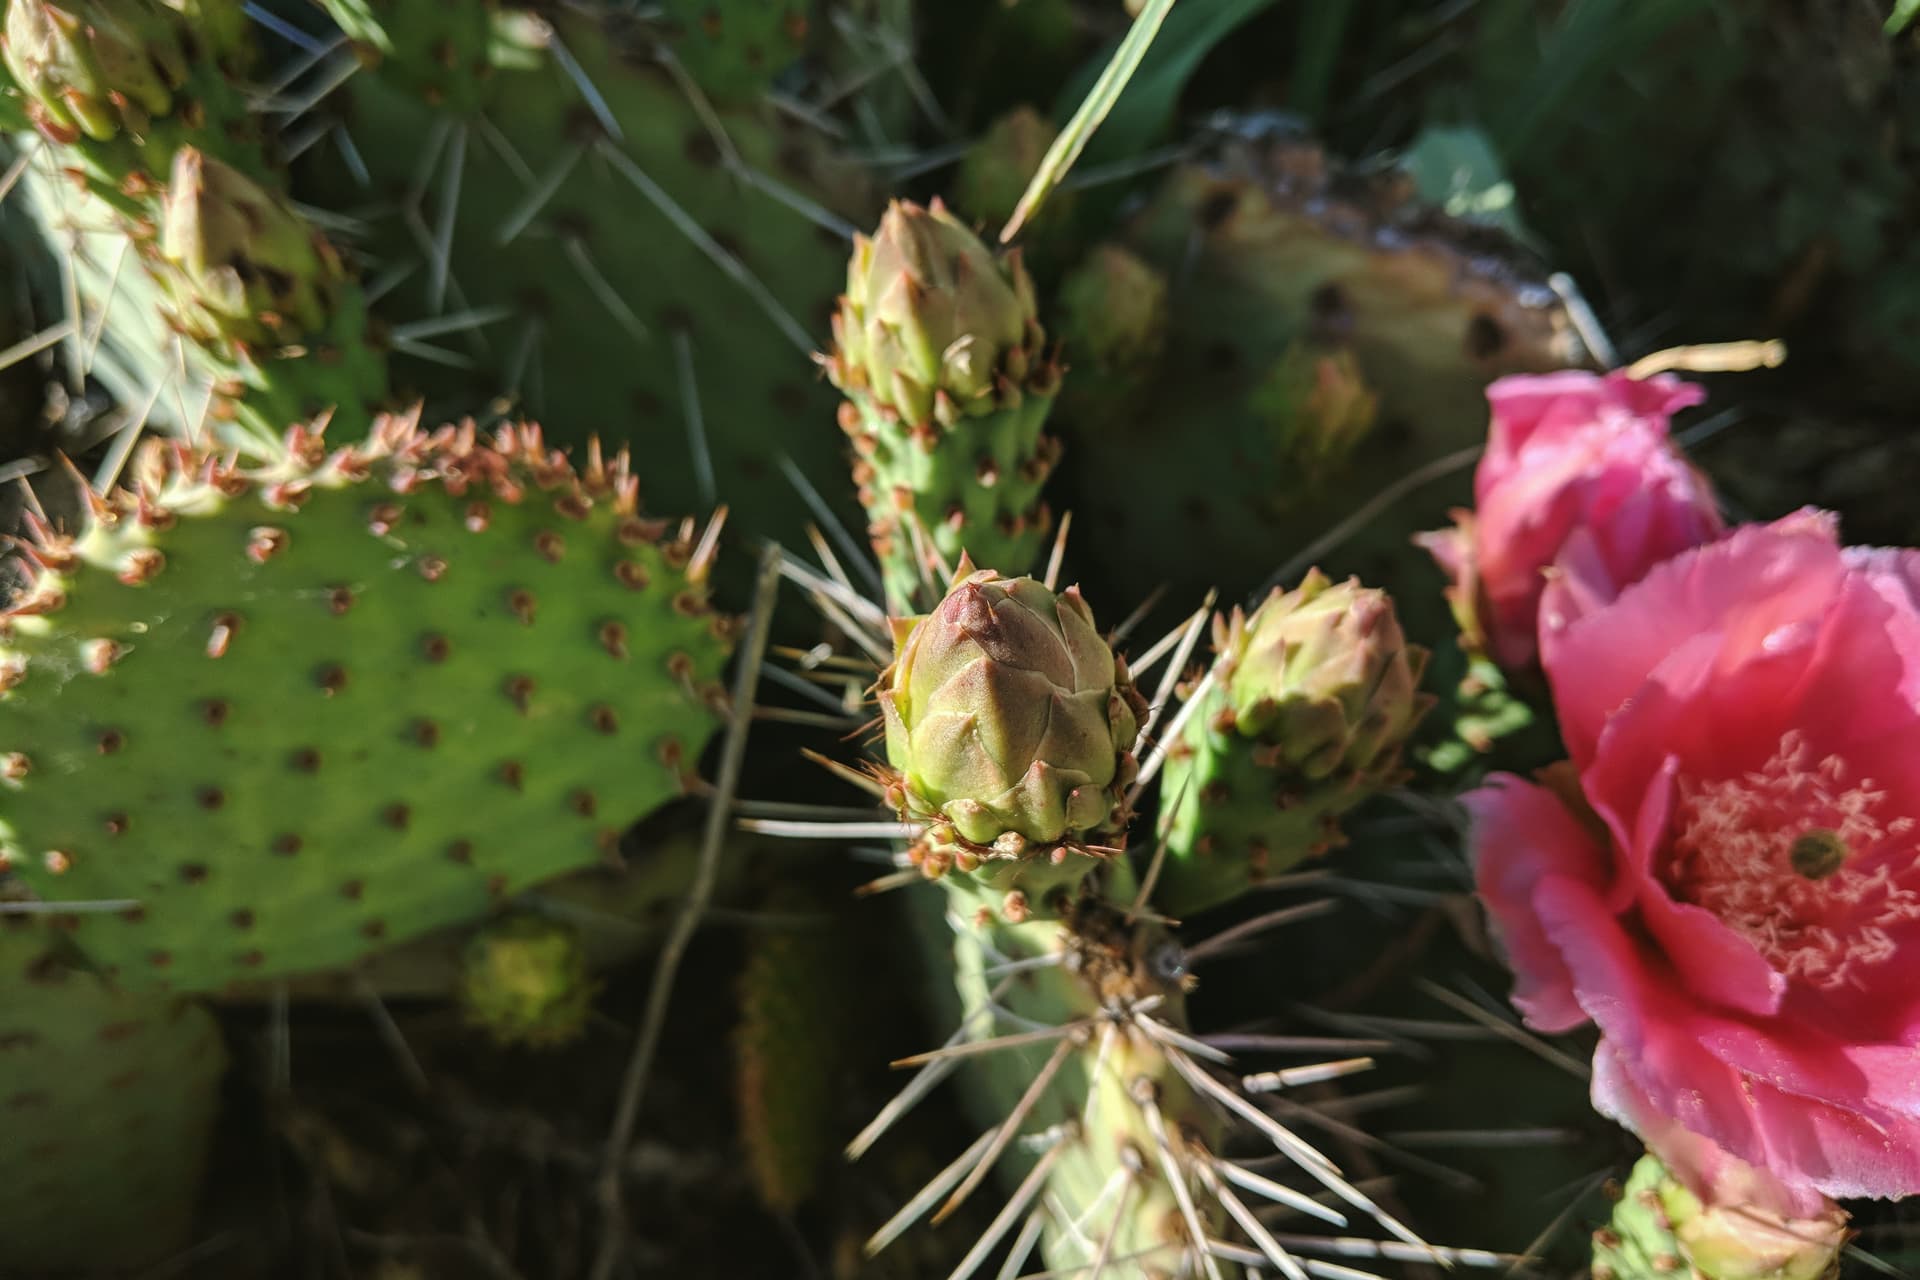 A prickly pear cactus flower on the verge of blooming.